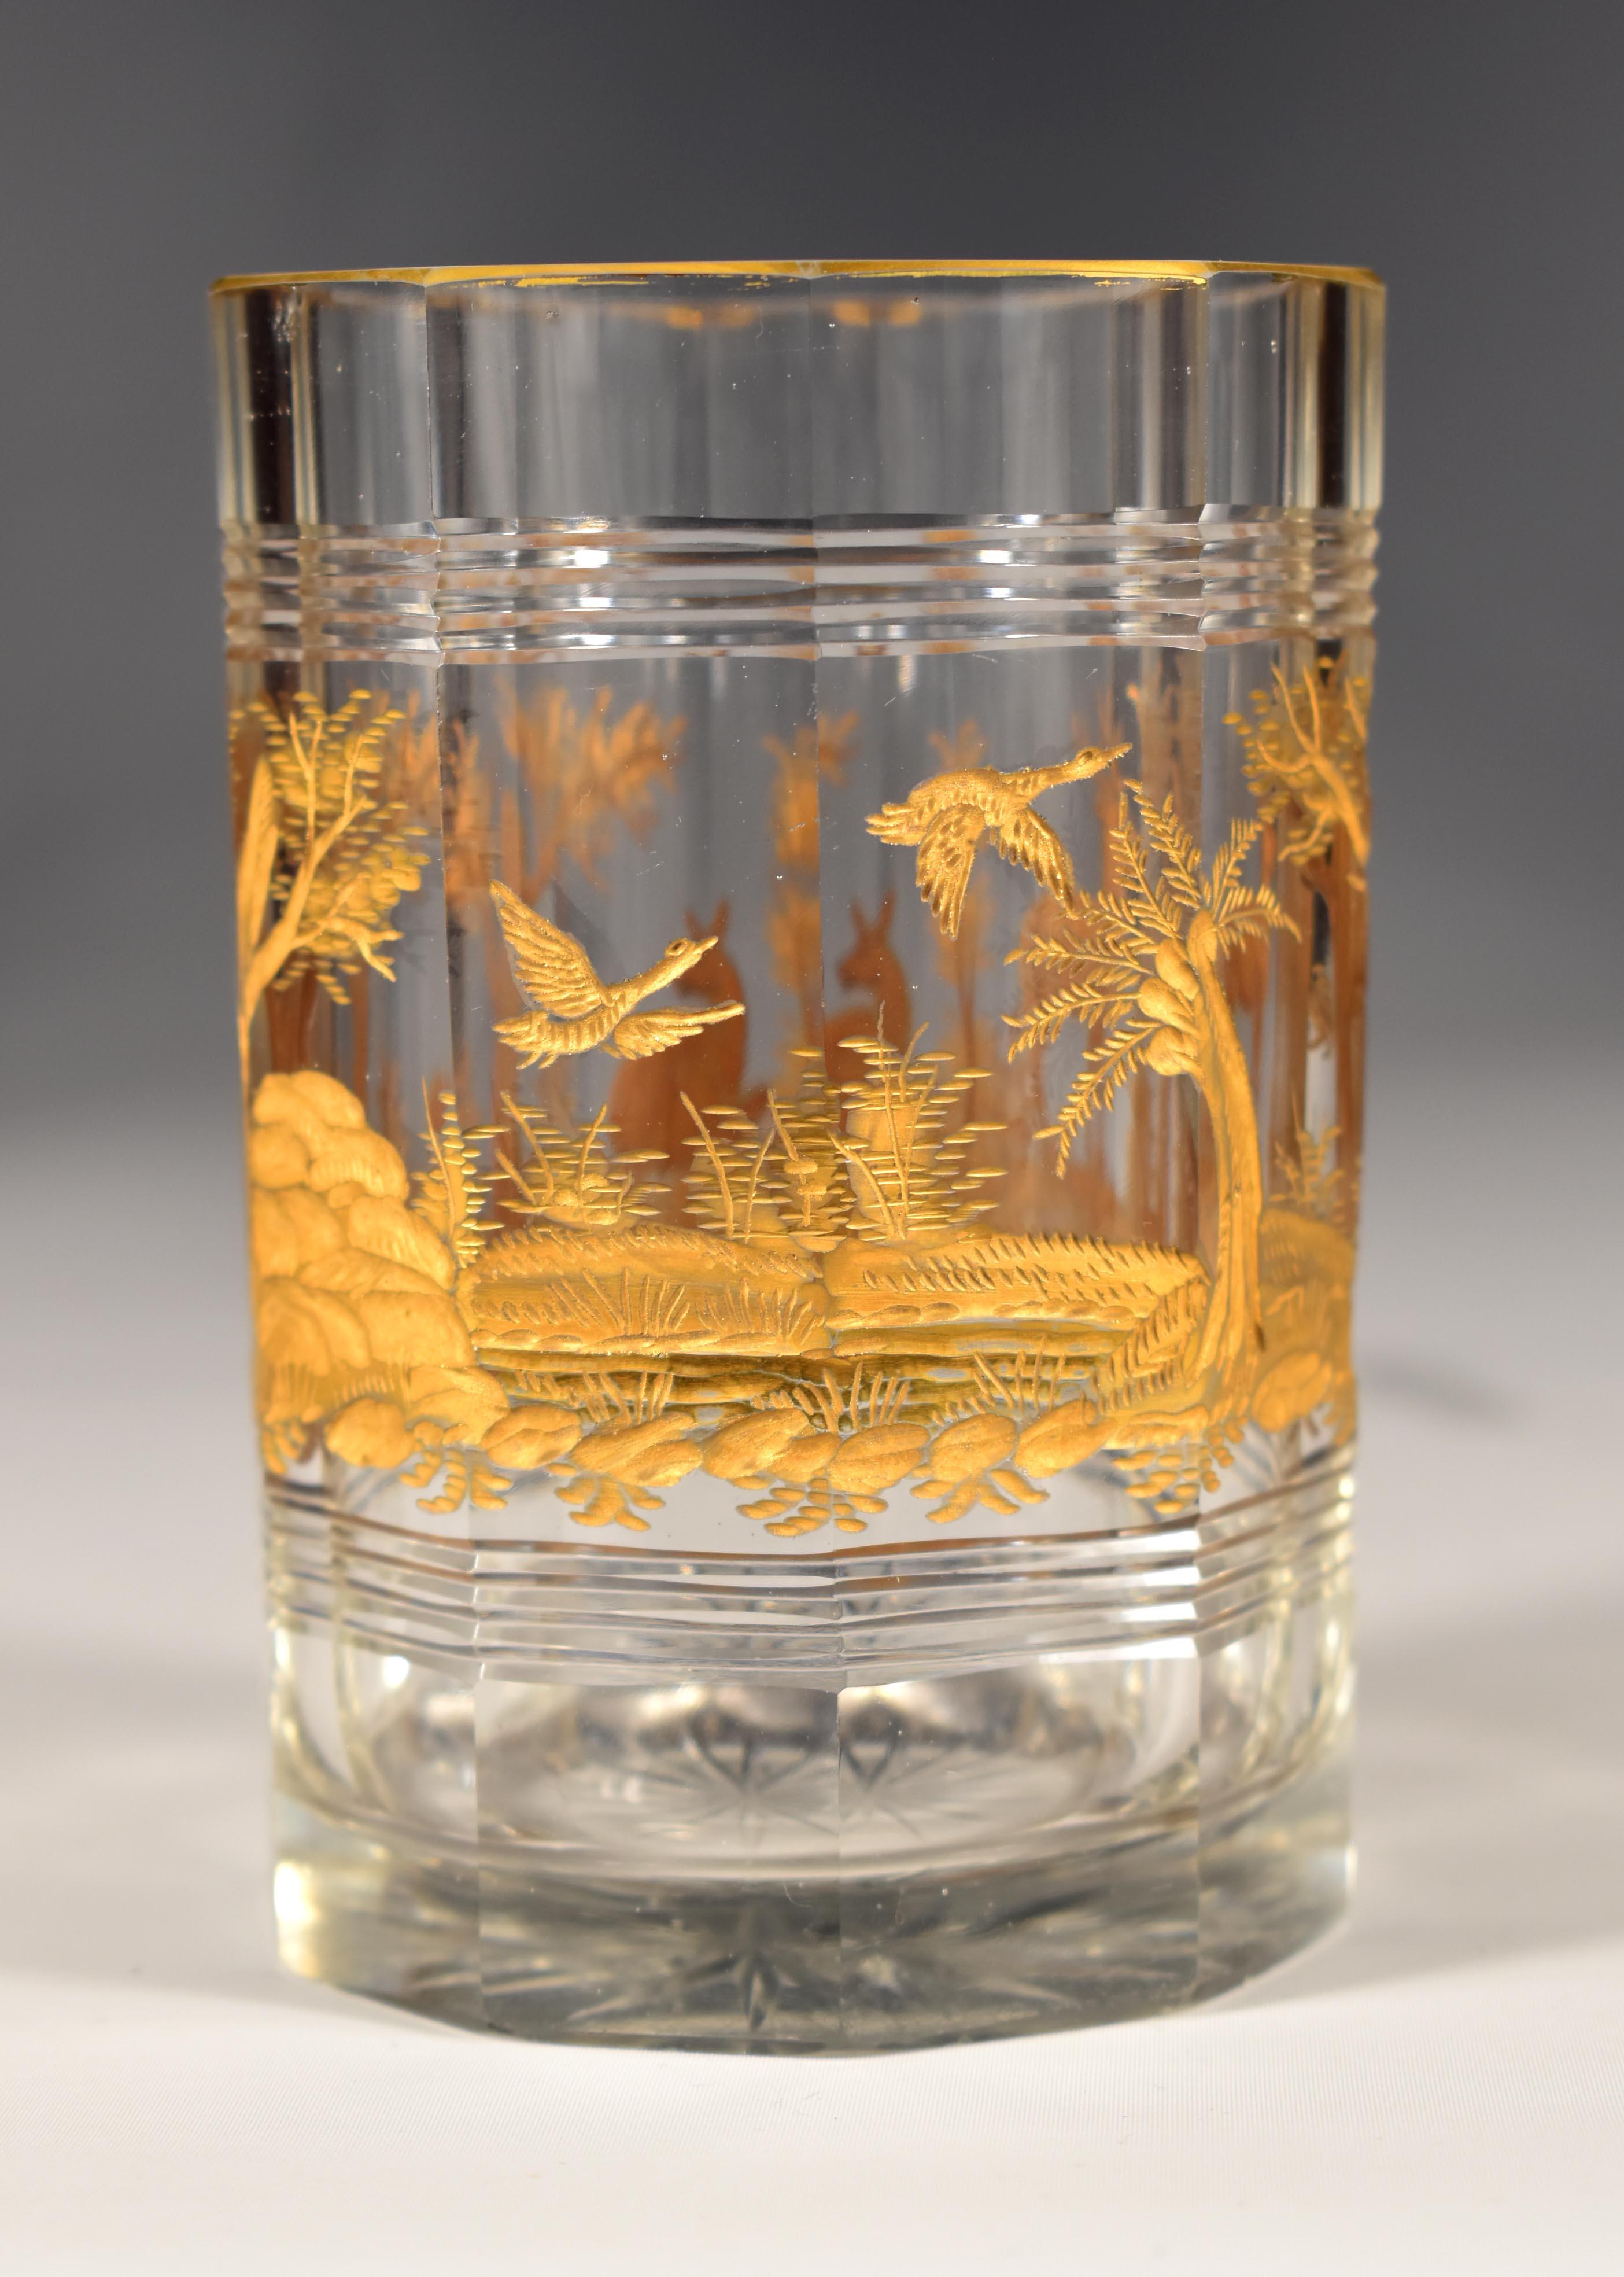 Gilded Vase + Two Gilded Glasses - Hunting motif. 20th century For Sale 5